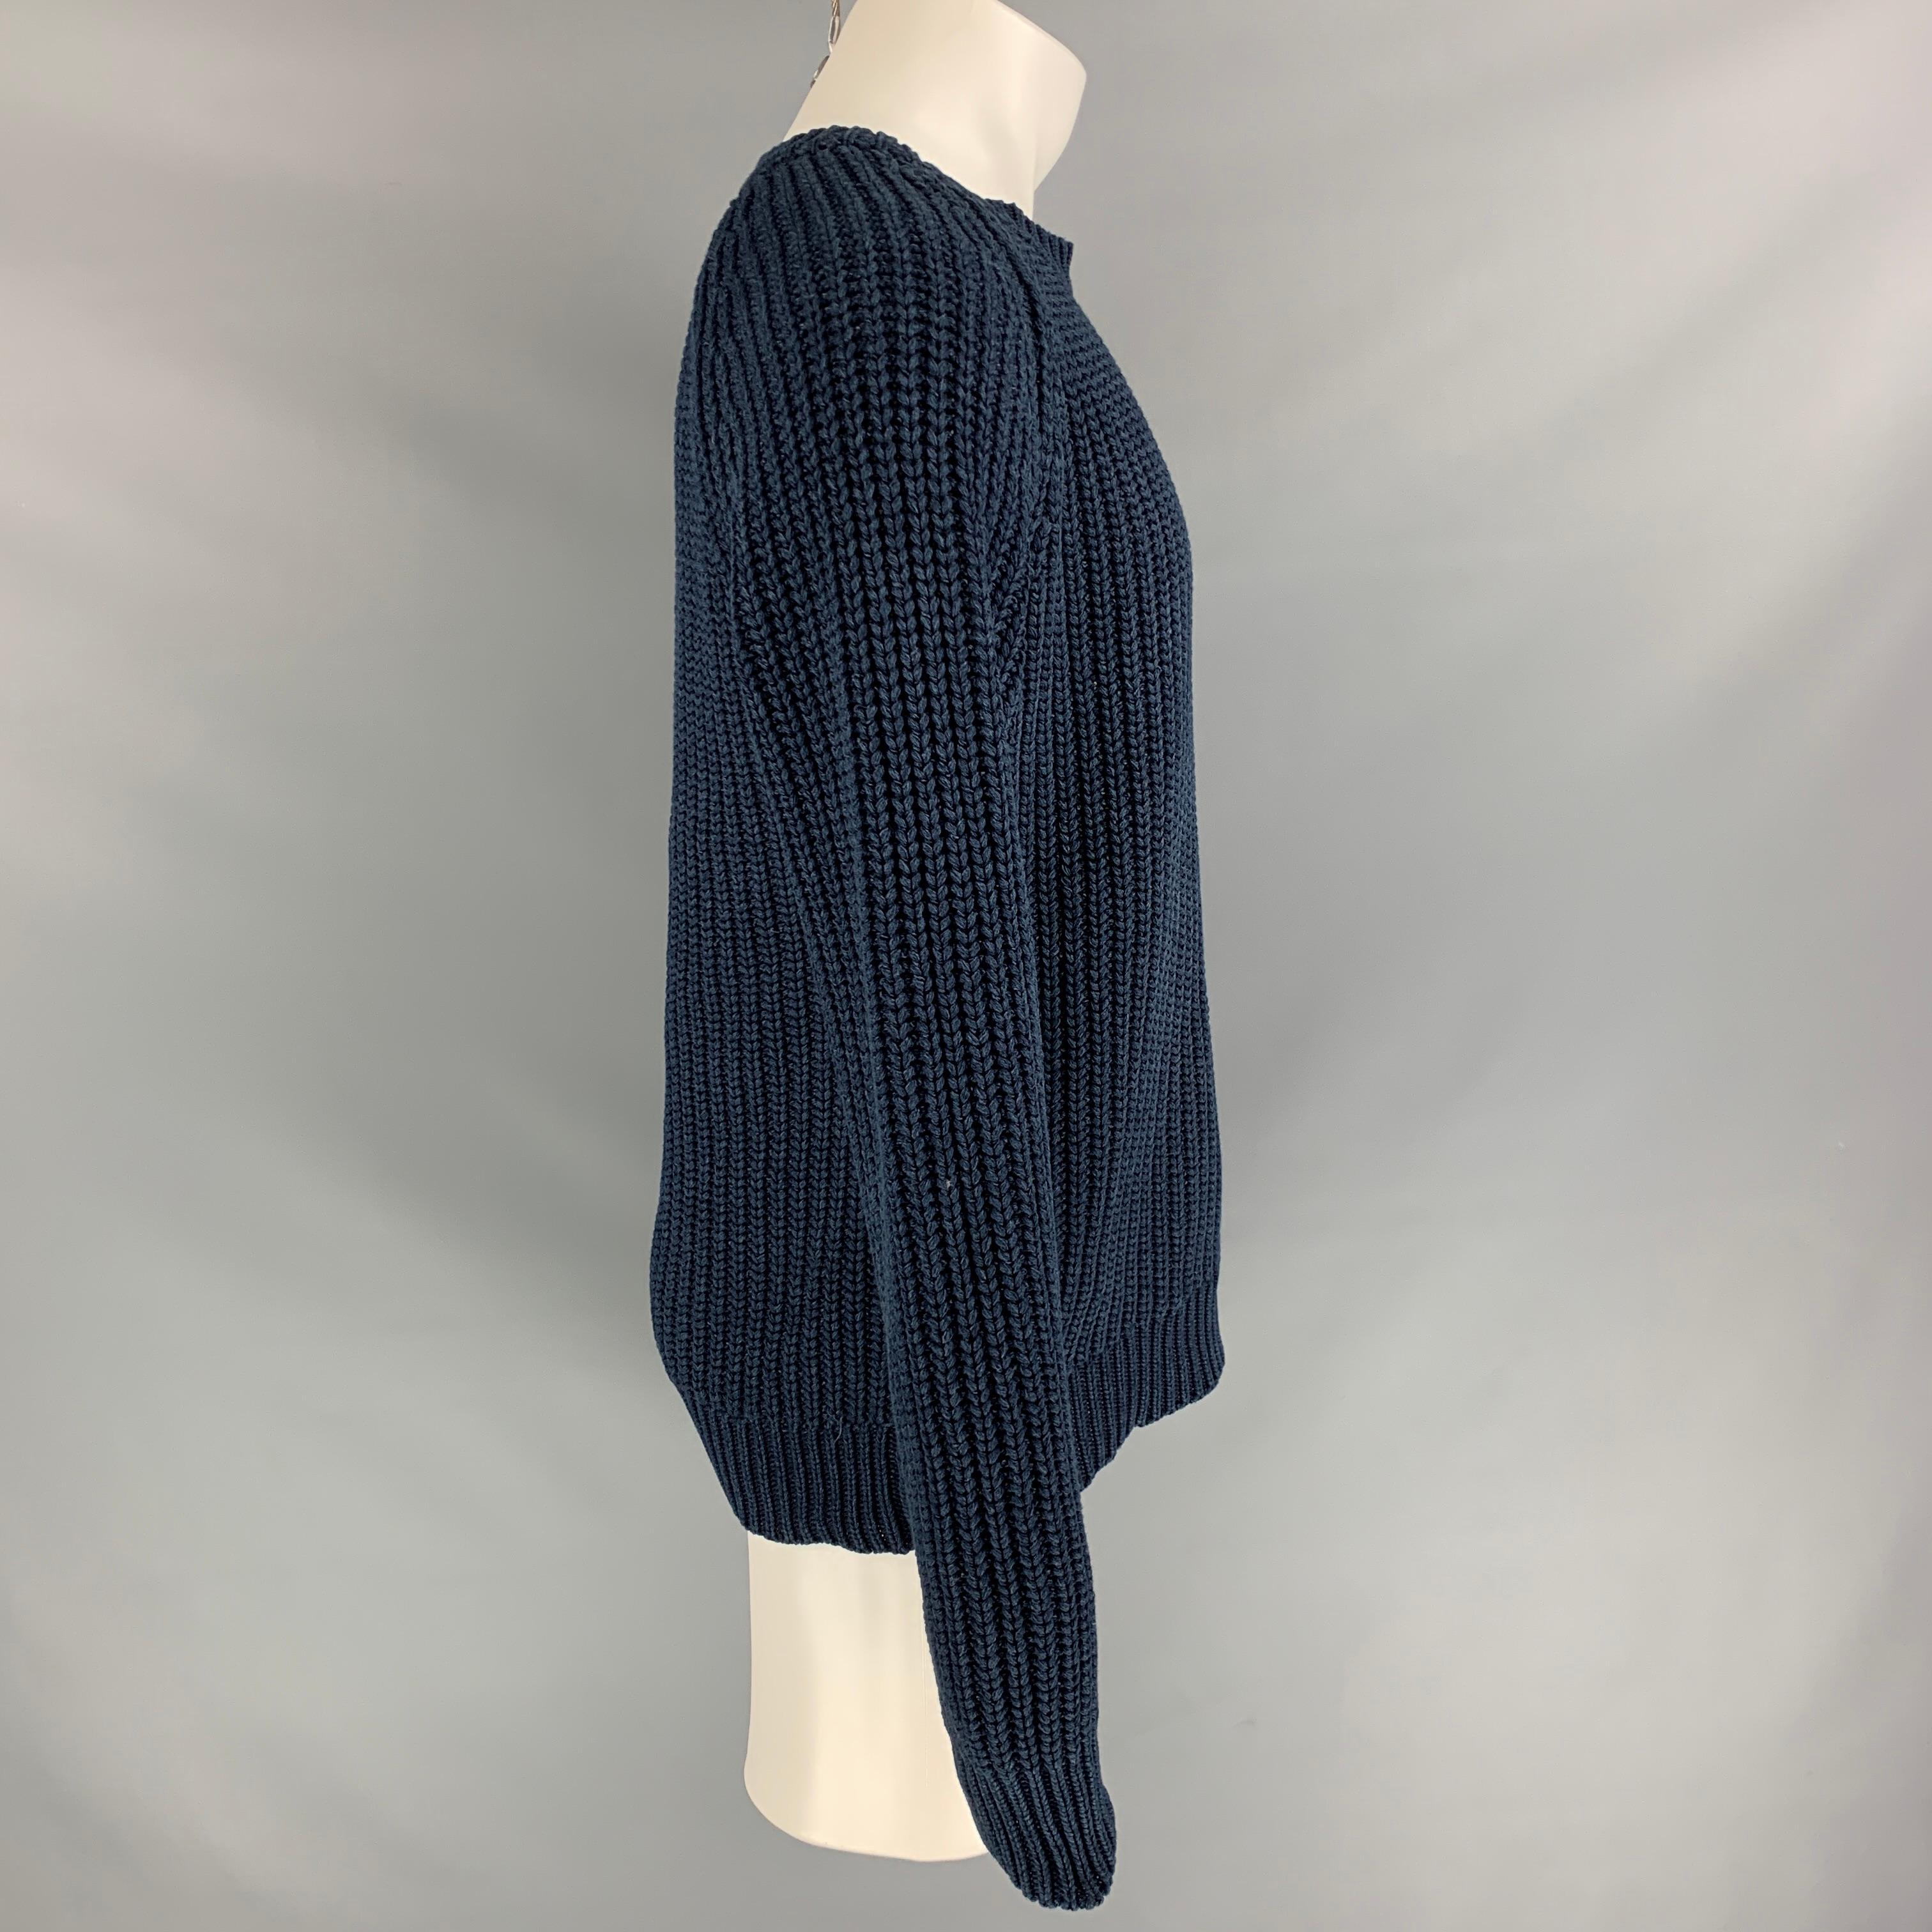 OUR LEGACY sweater comes in a navy knitted cotton featuring long sleeves and a turtleneck. Made in Portugal.

Very Good Pre-Owned Condition.
Marked: 50

Measurements:

Shoulder: 17.5 in.
Chest: 40 in.
Sleeve: 29 in.
Length: 17.5 in. 